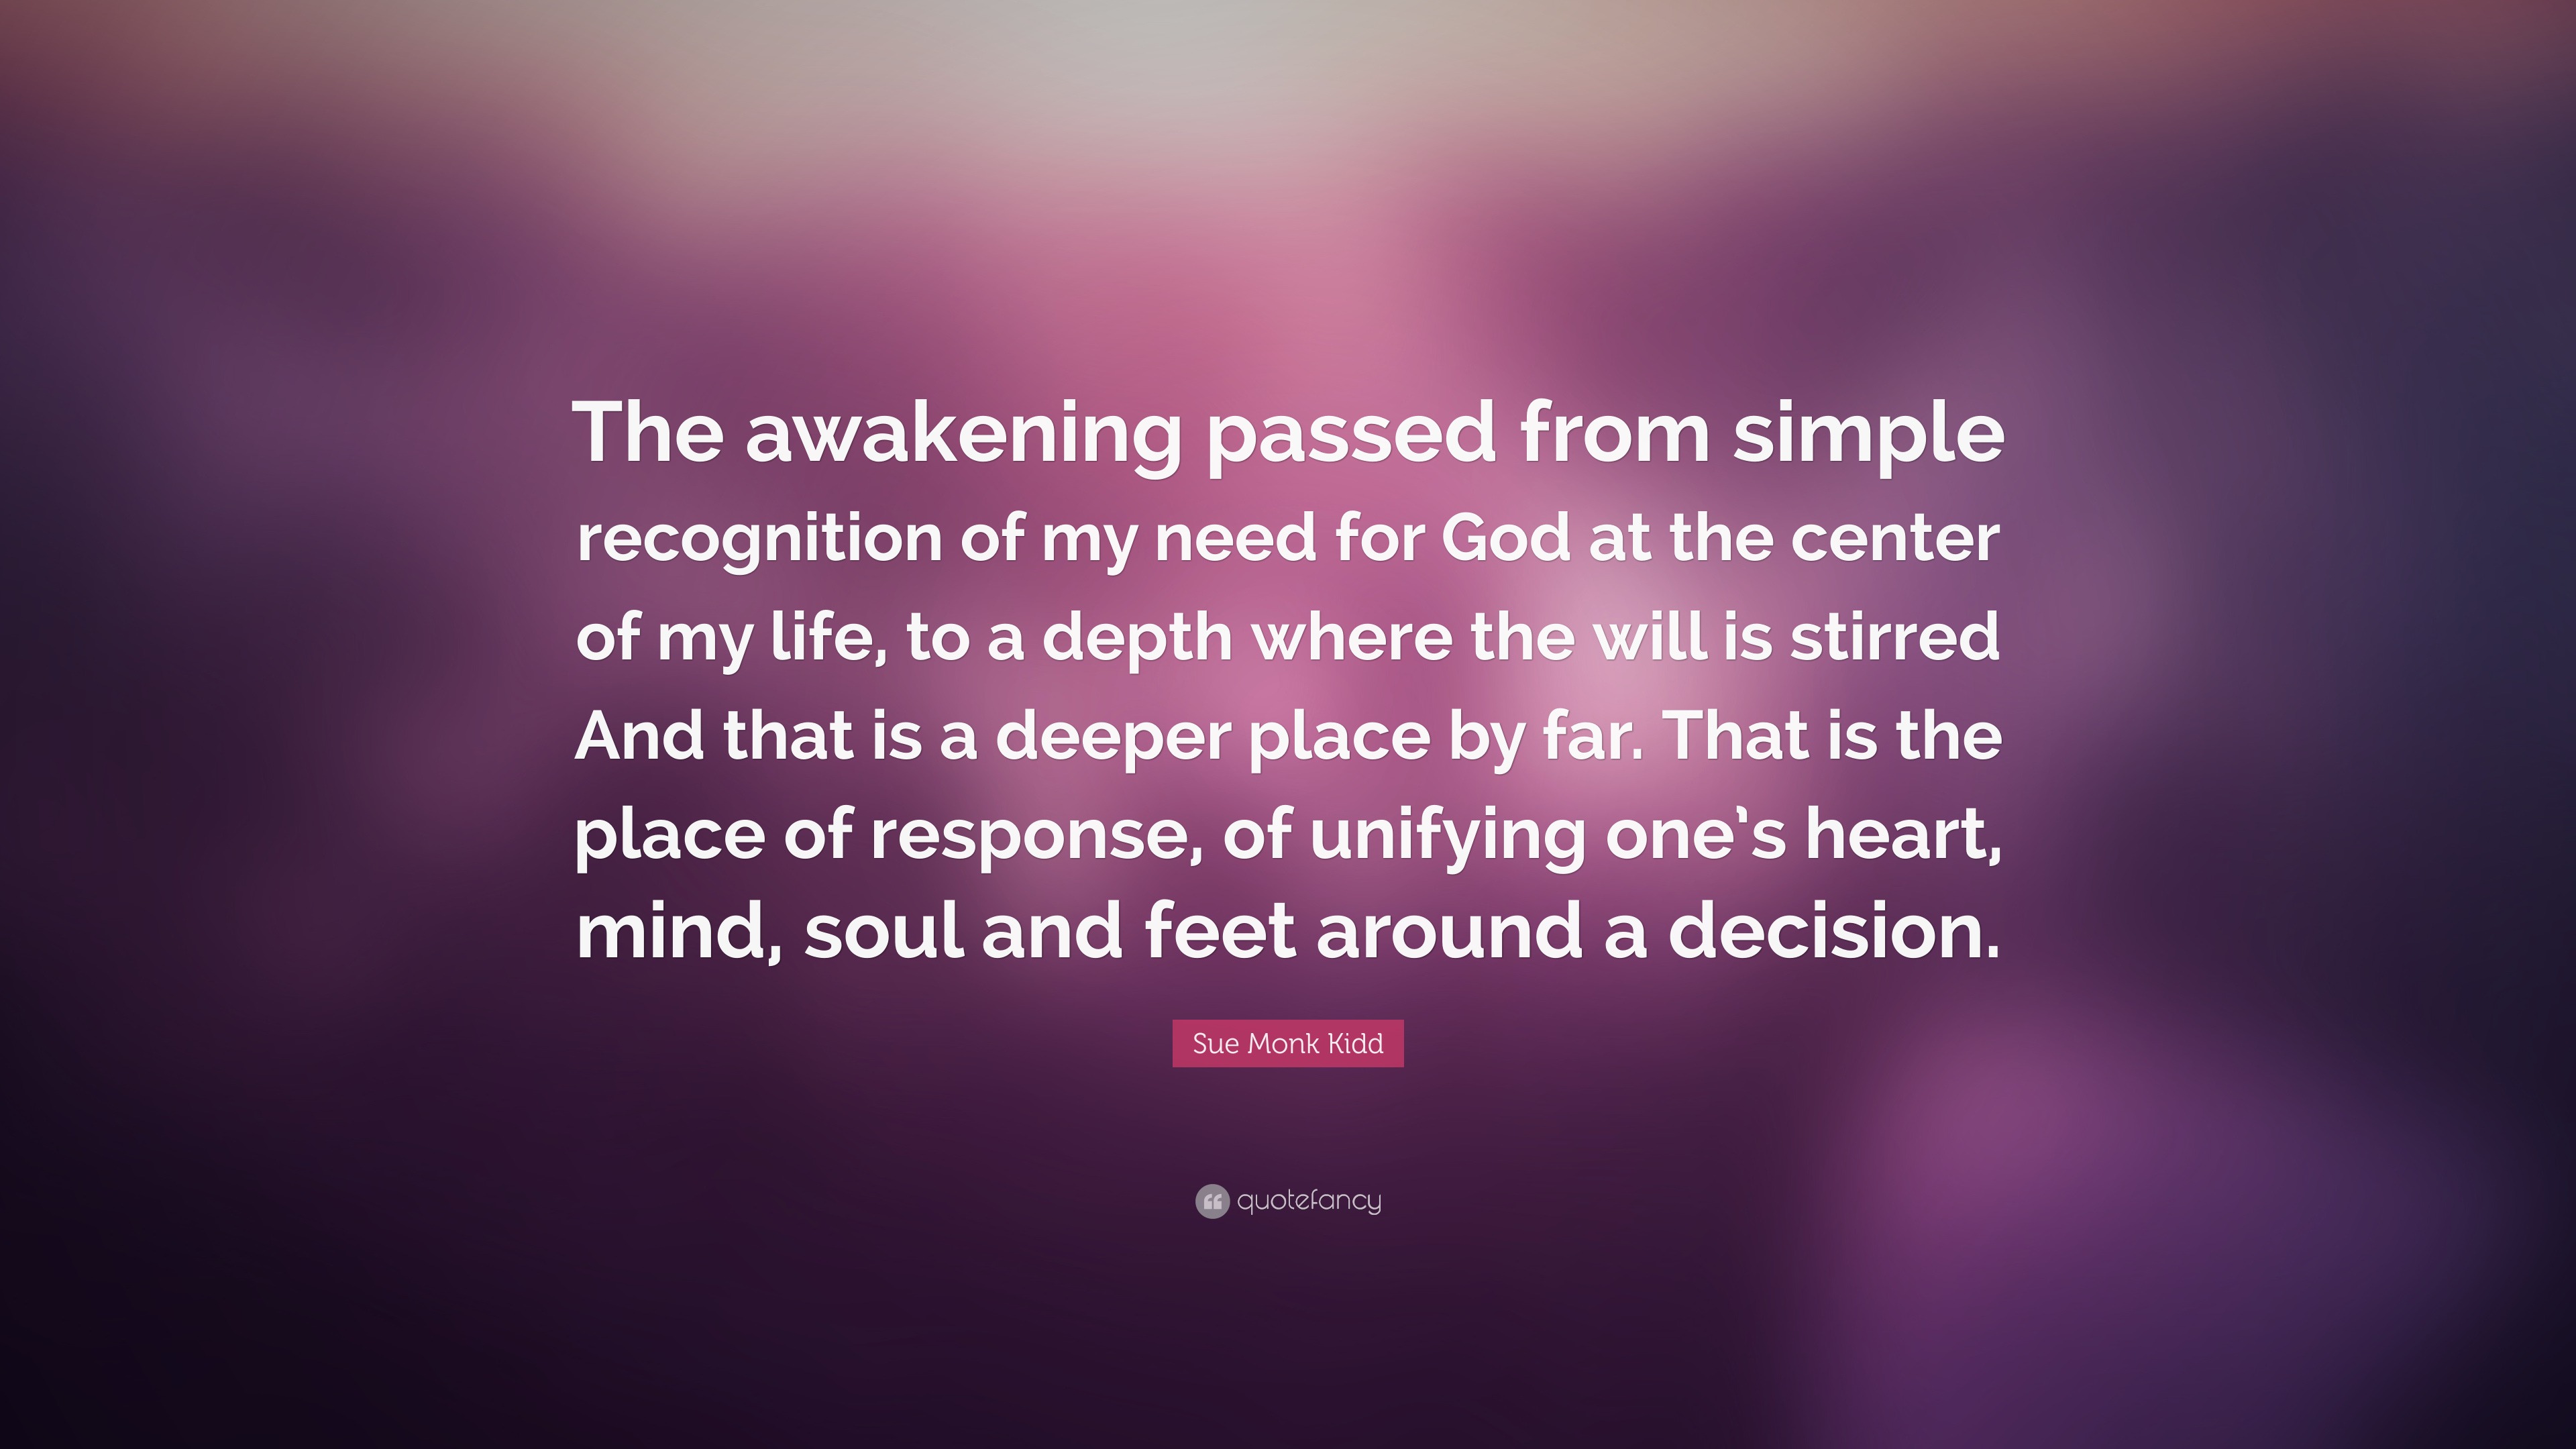 Sue Monk Kidd Quote “The awakening passed from simple recognition of my need for